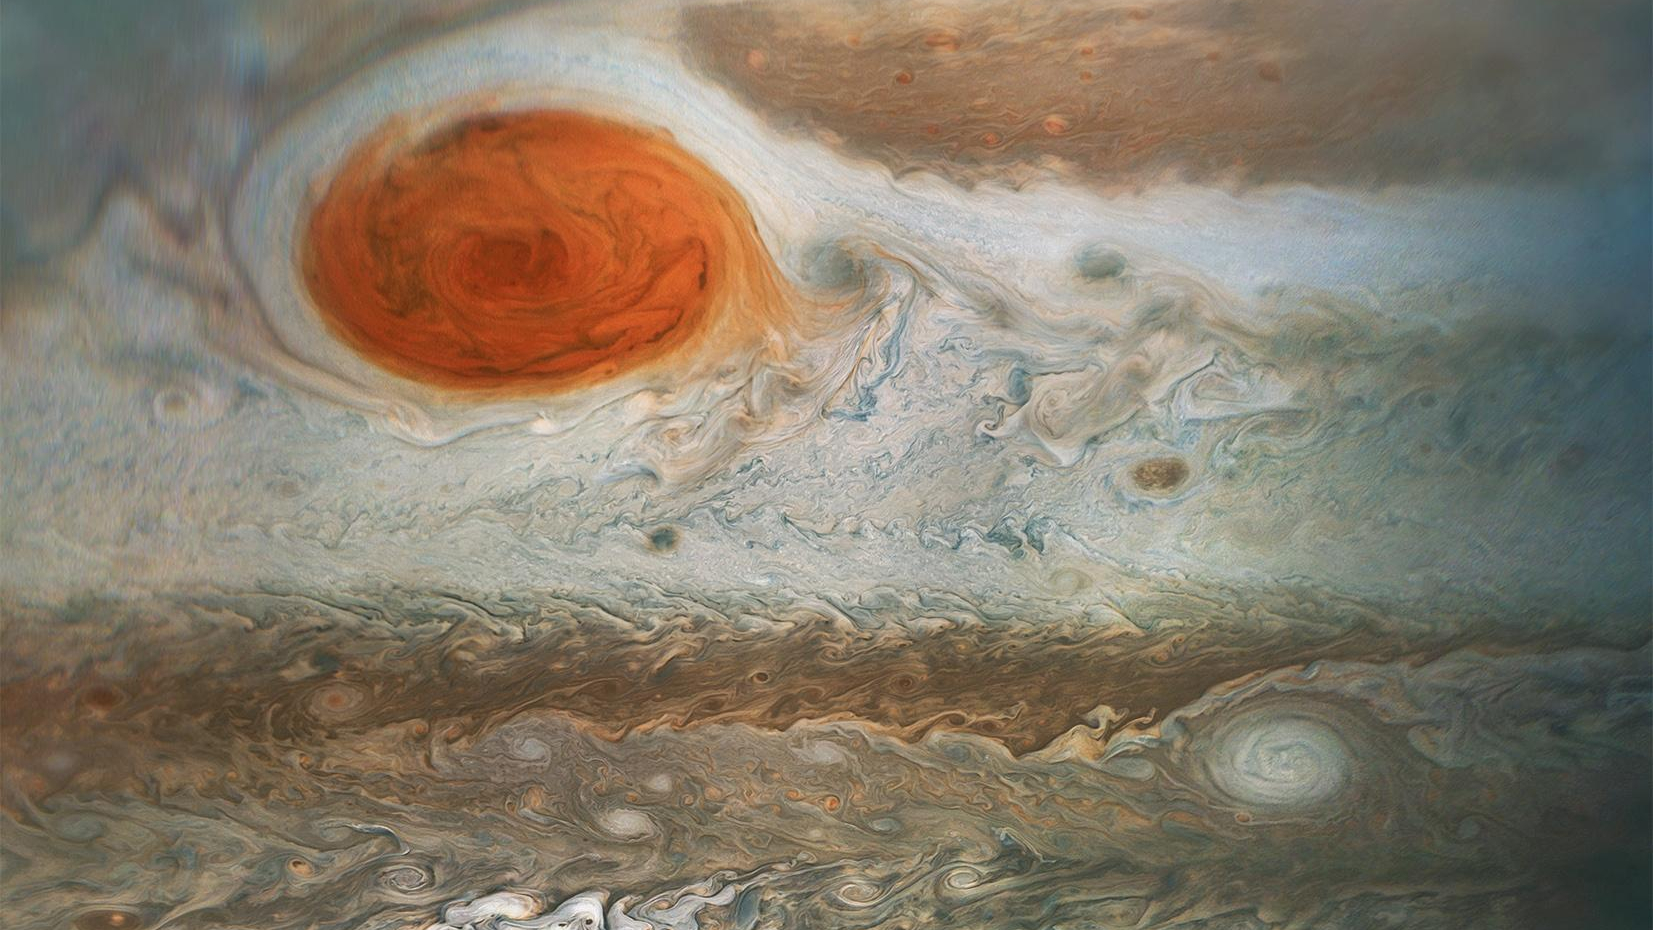 Is Jupiter’s Great Red Spot an impostor? Giant storm may not be the original one discovered 350 years ago Space